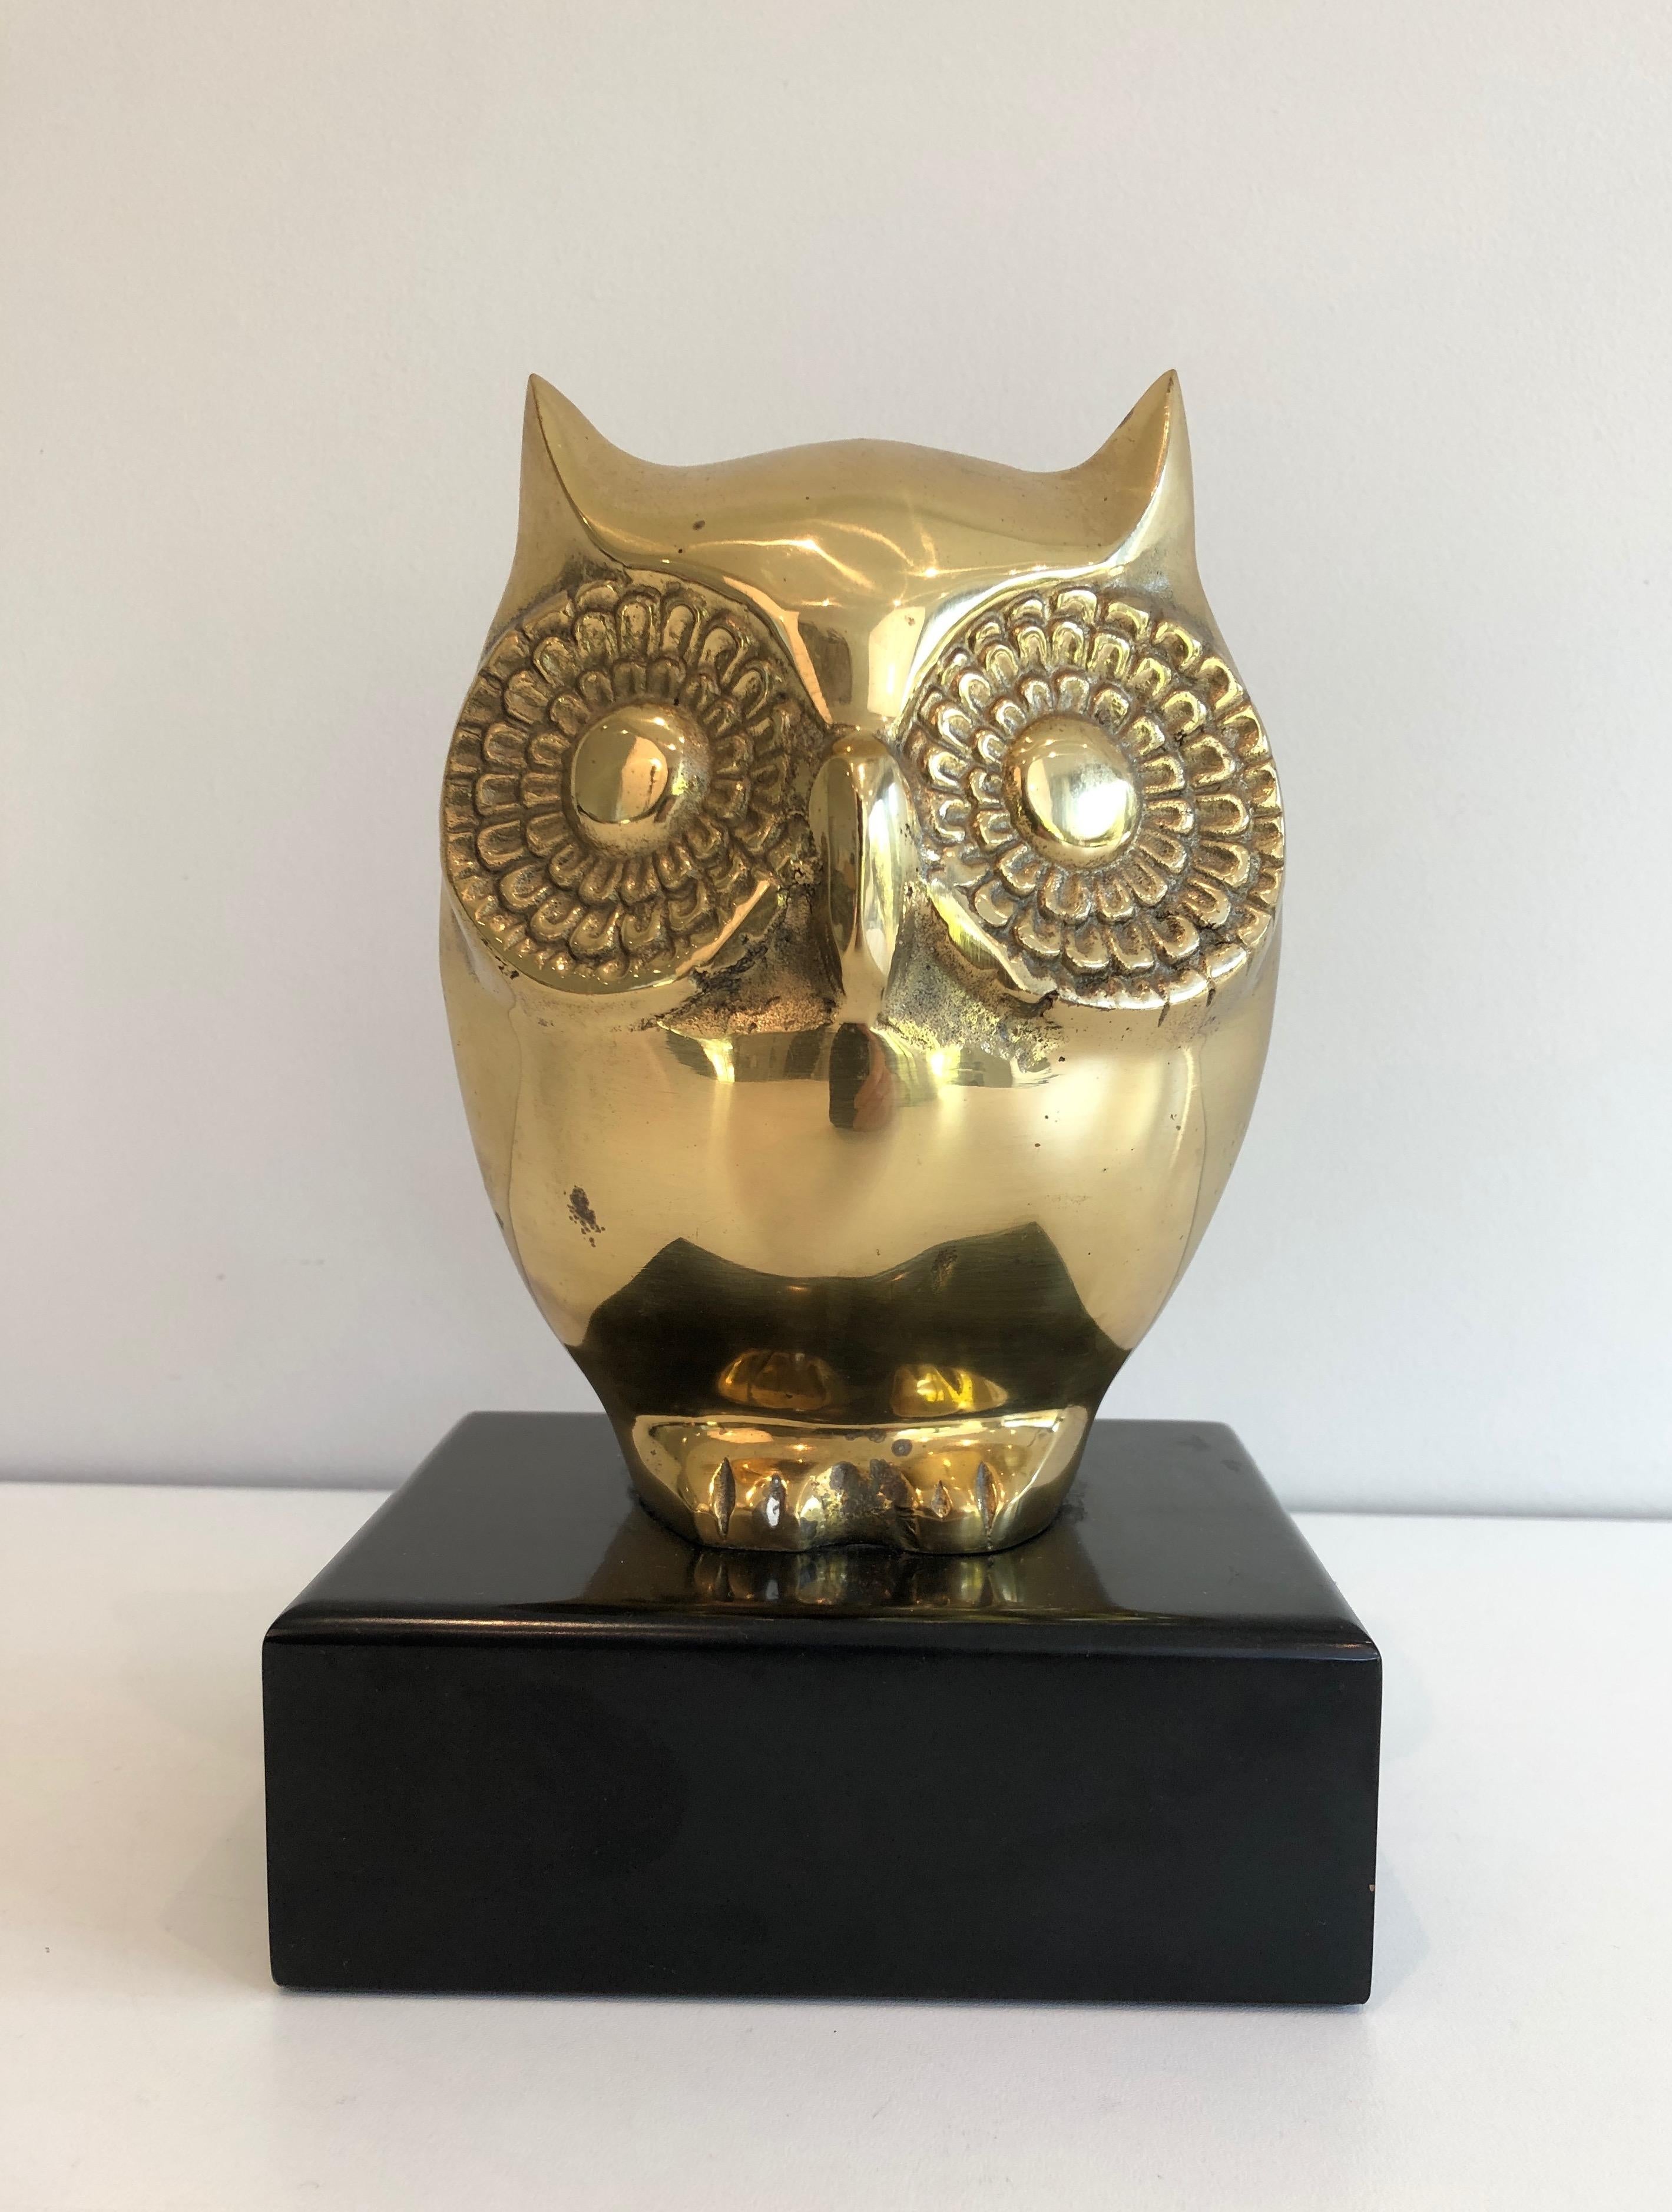 This decorative and fine owl is made of brass on a black lacquered wooden Stand. This is a French work, circa 1970.